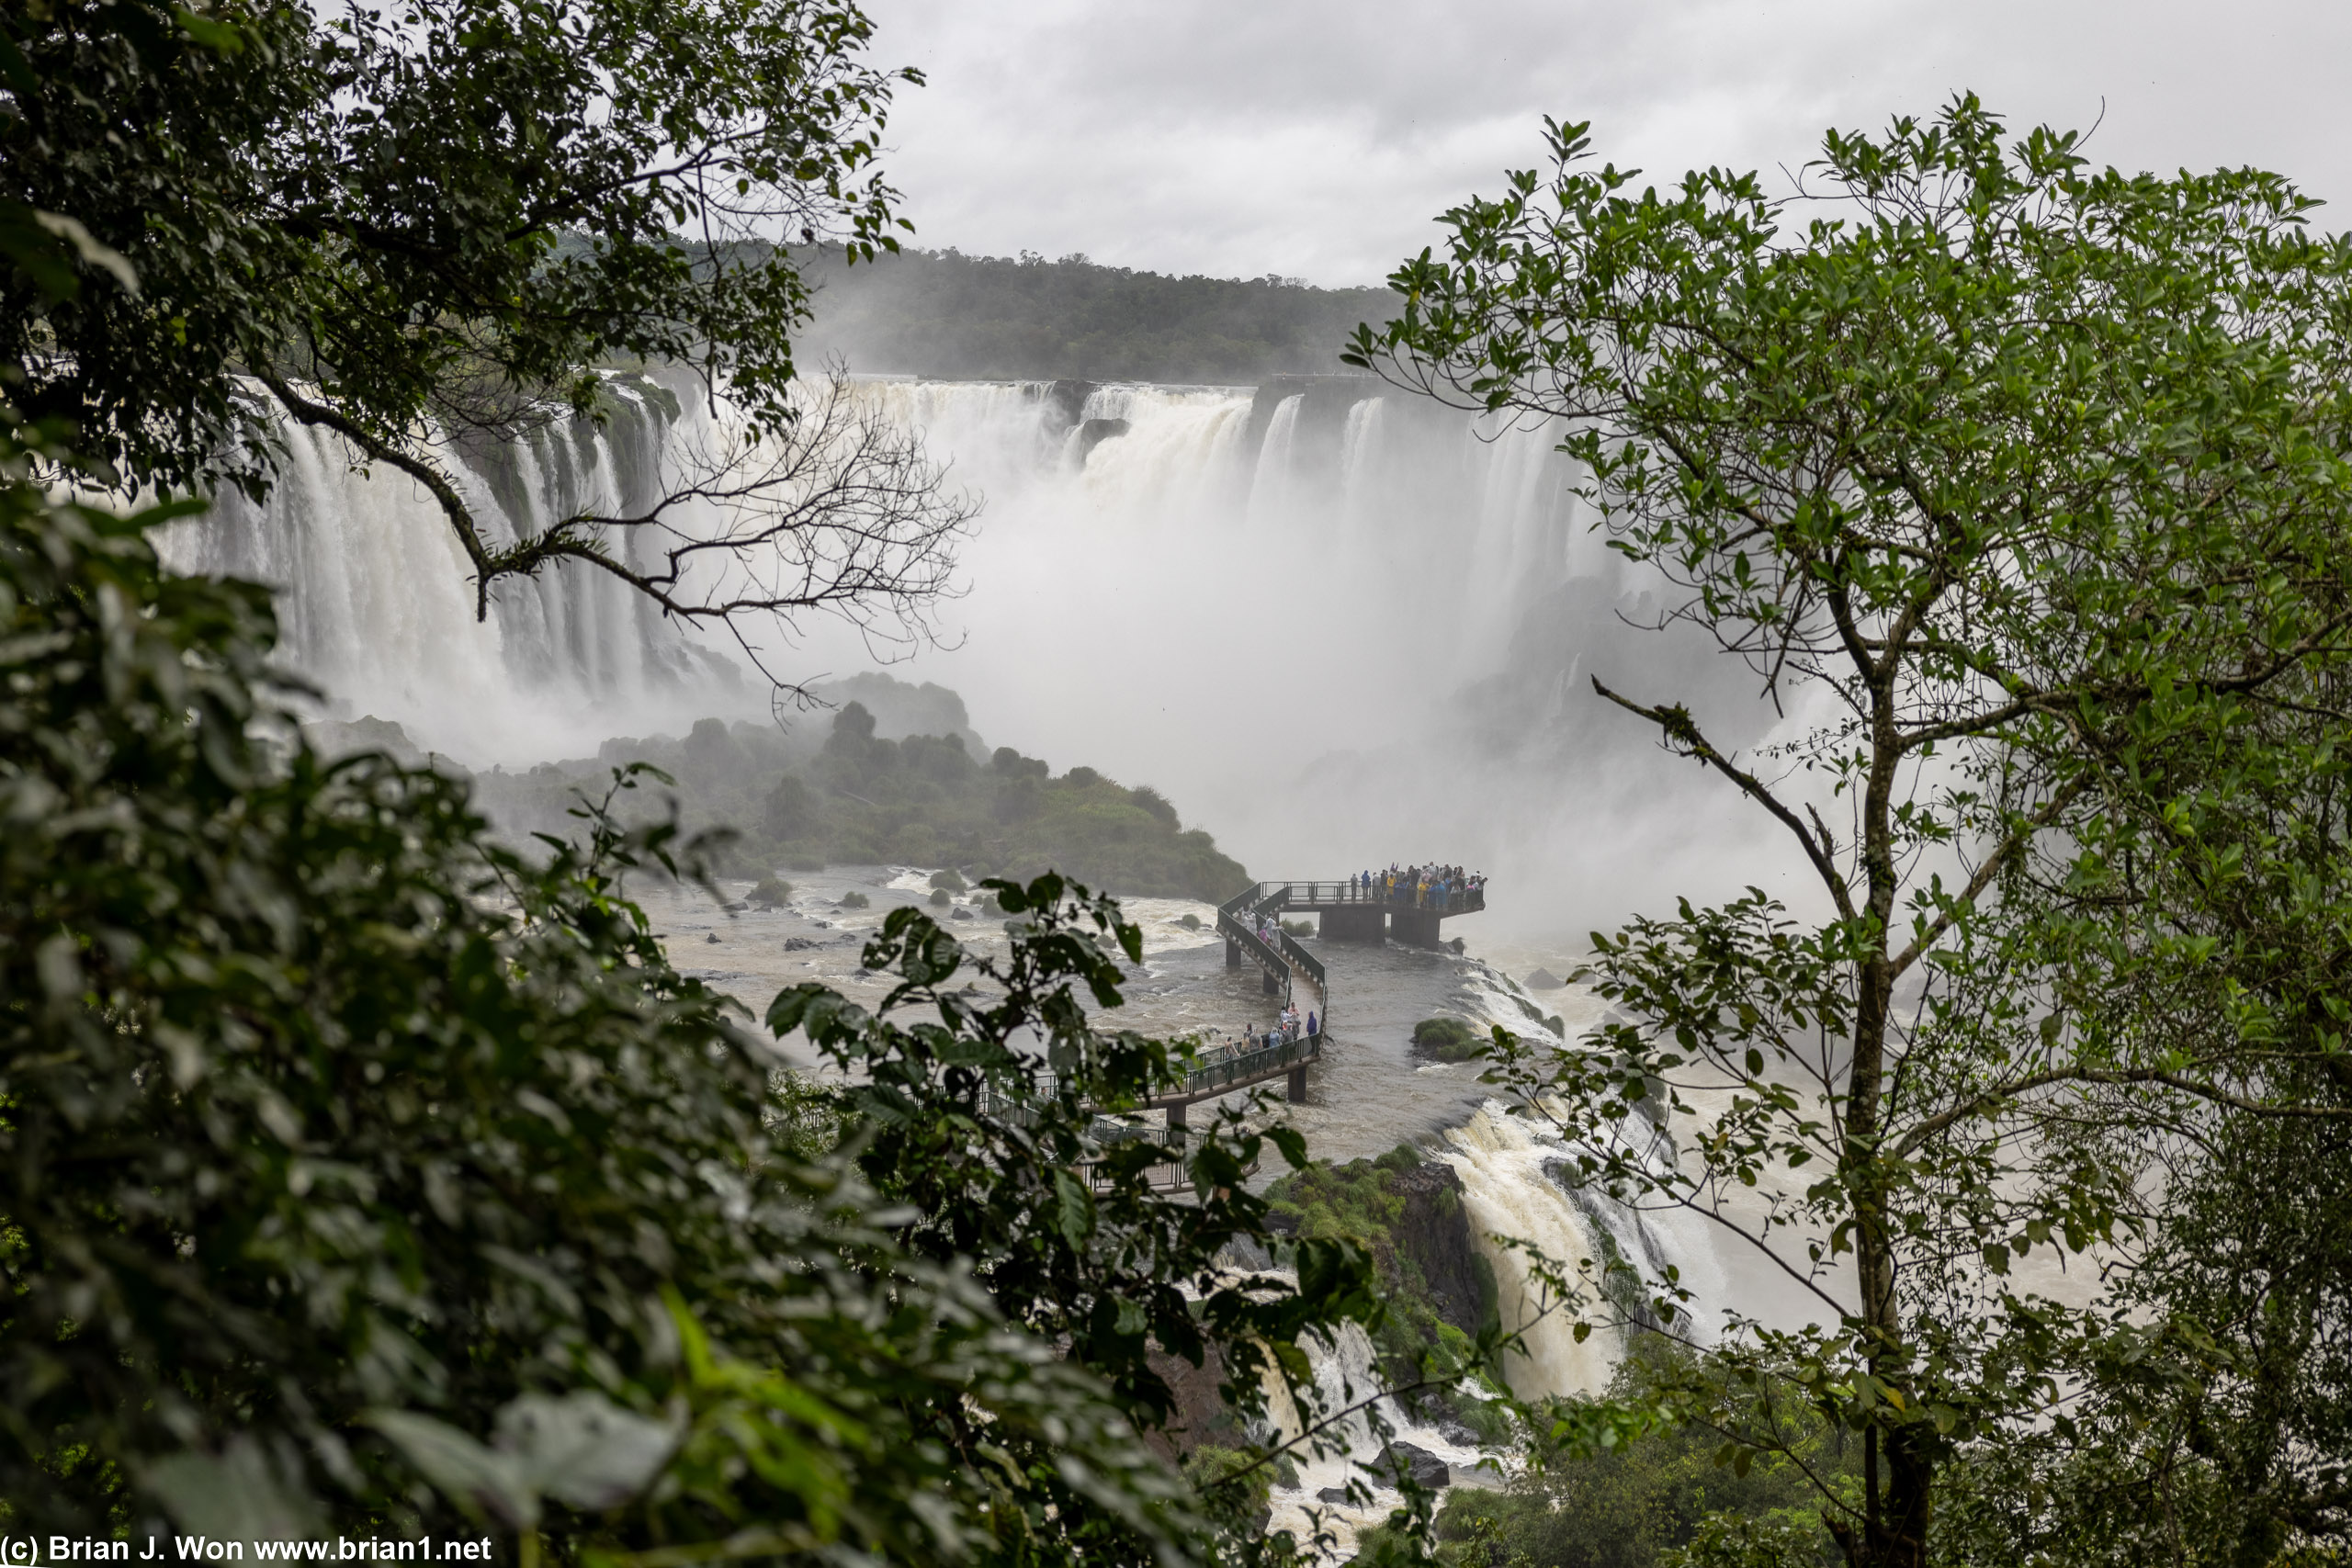 First view of the Devil's Throat, the most impressive part of Iguazu Falls.